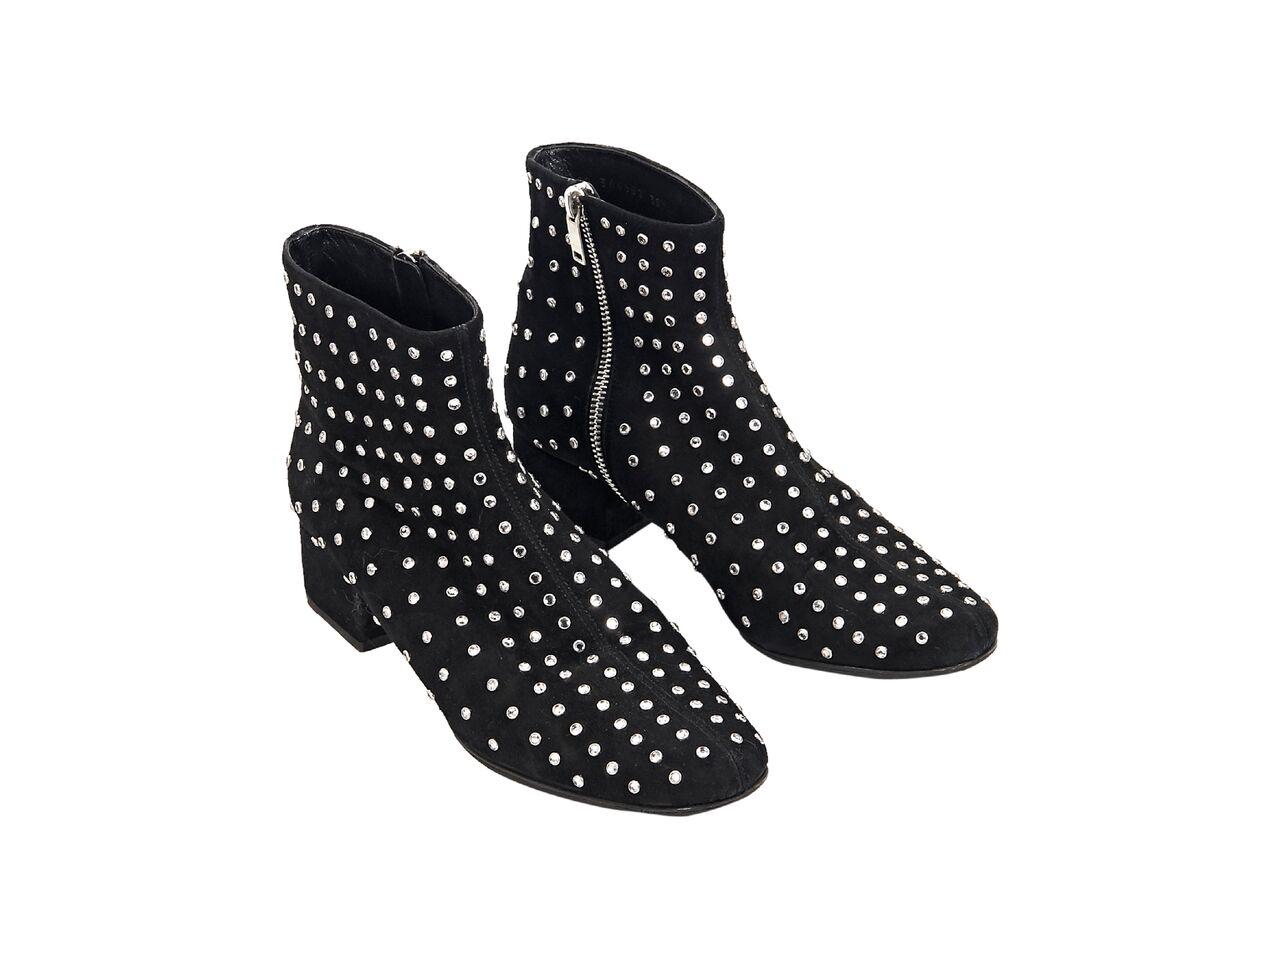 Product details:  Black studded suede ankle boots by Saint Laurent.  Inner zip closure.  Round toe.  Silvertone hardware.  1.5